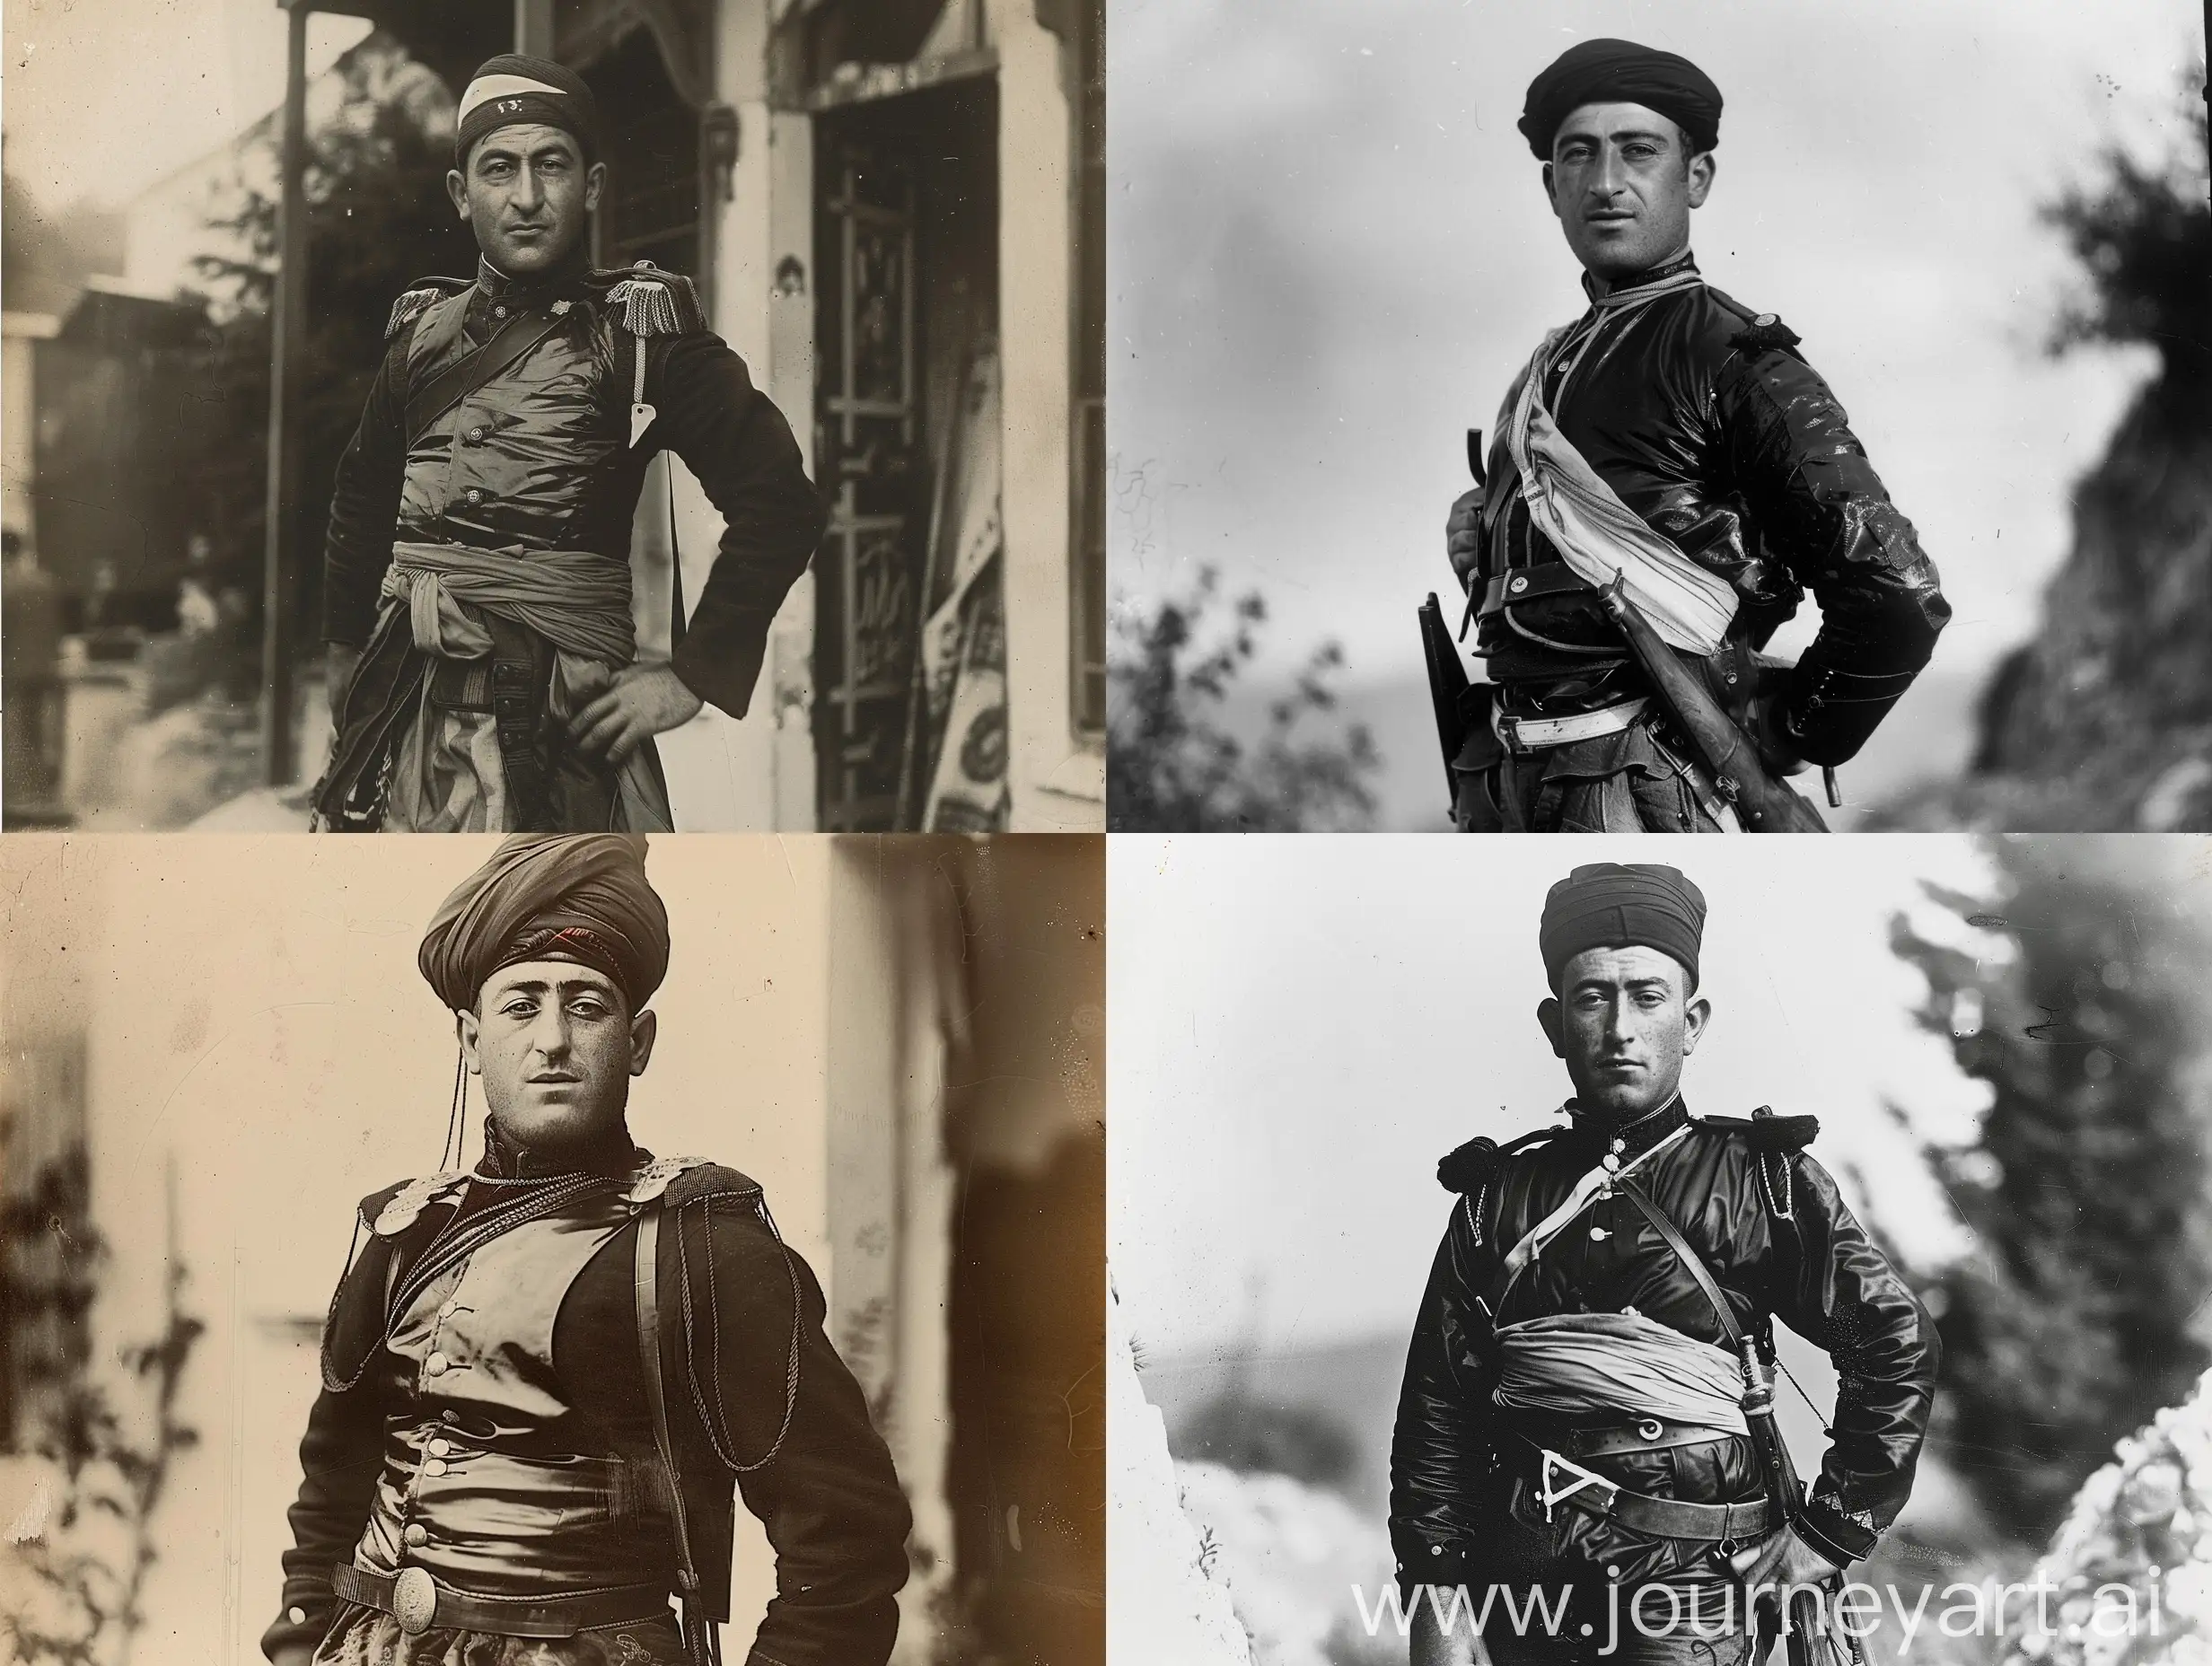 Yörük Ali Efe, born Ali Efe Yörük, was born in 1895 in Sultanhisar district of Aydın. Yörük Ali Efe, one of the important heroes of the Turkish War of Independence, dealt the first blow to the enemy with the Malgaç Raid on June 16, 1919 and stopped the advance of the enemy forces in the Aydın region. With this success, he became one of the symbols of resistance in the Aegean Region.